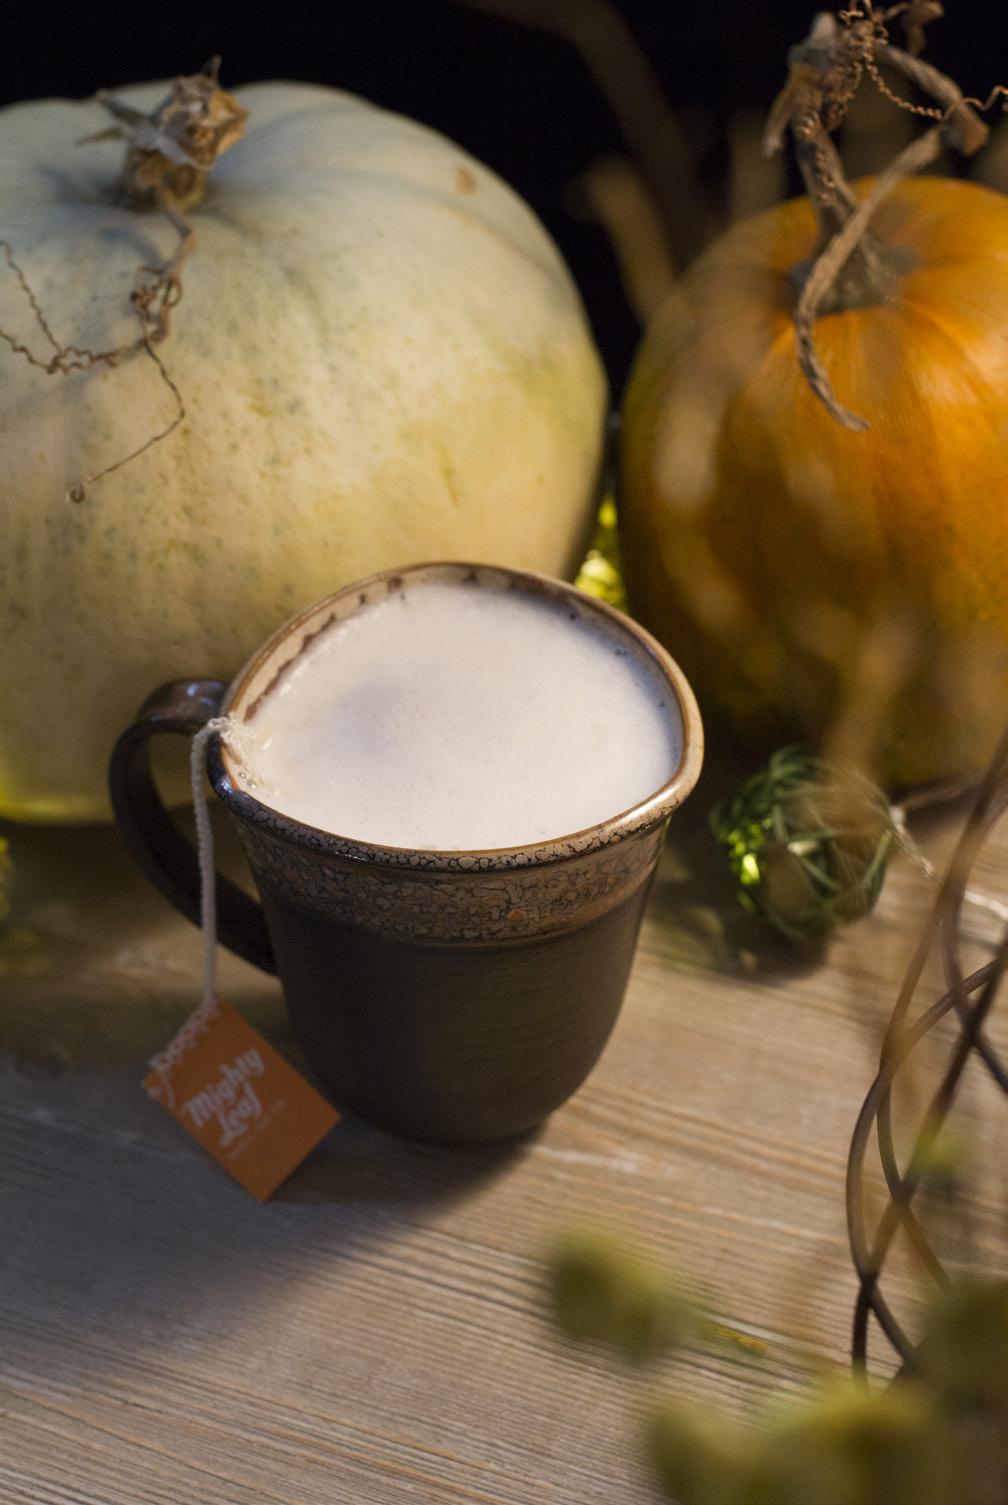 Chamomile Citrus Au Lait When I was a barista I was always looking to create cozy drinks on cold days. This subtly sweet and relaxing tea au lait is sure to hit the spot on a blustery fall day.